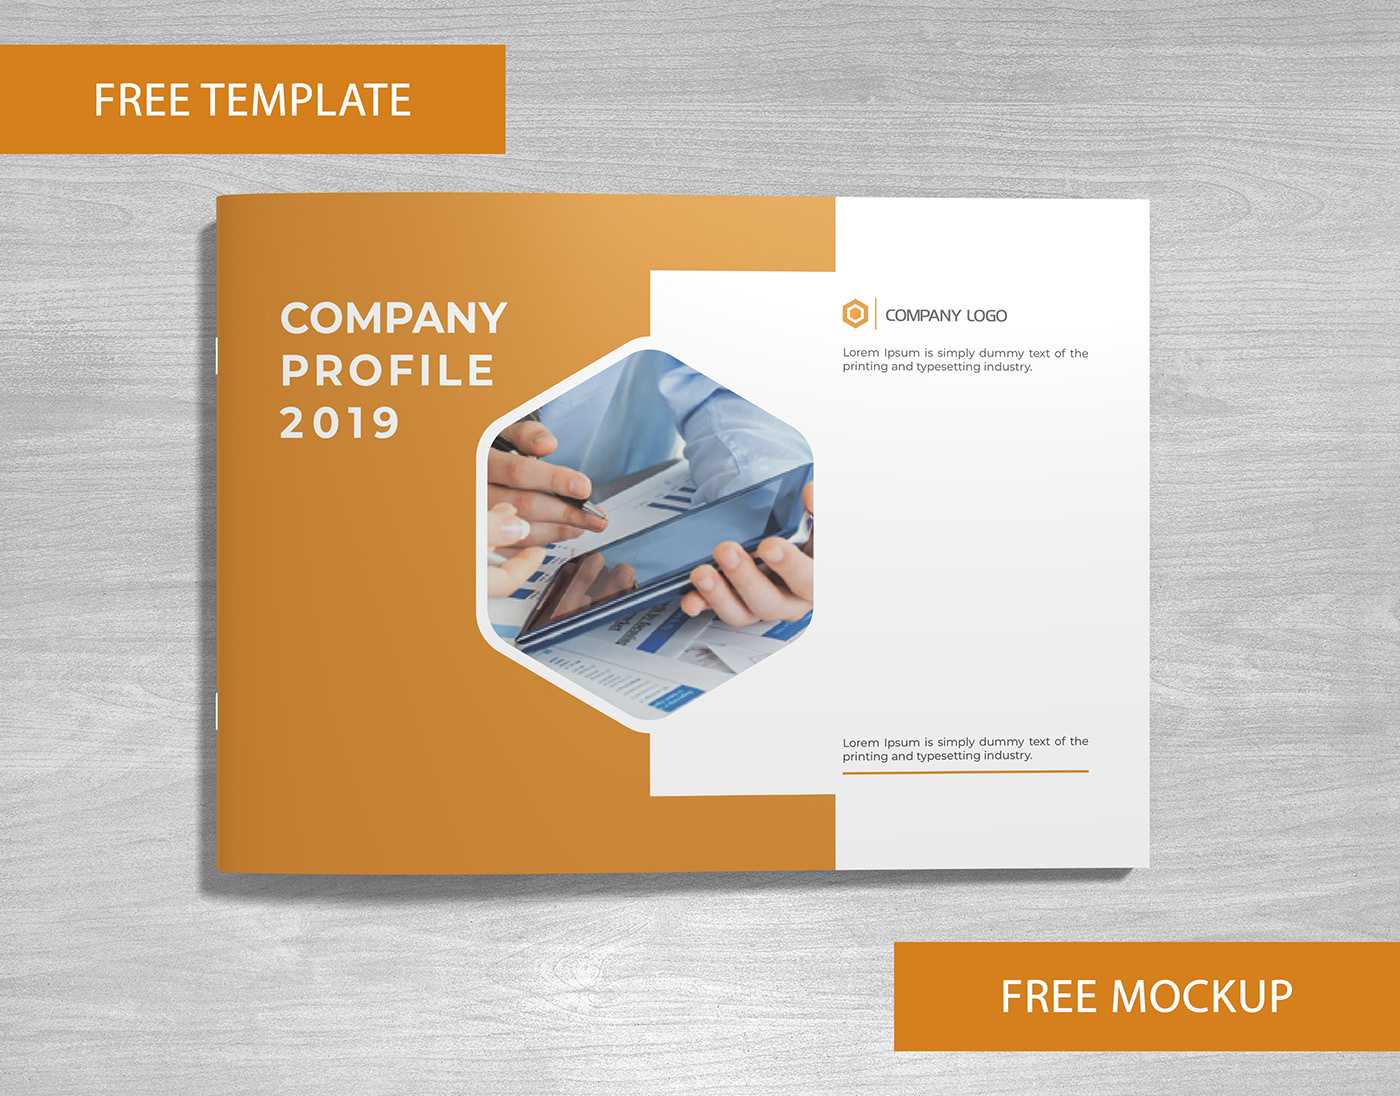 Company Profile Free Template And Mockup Download On Behance Regarding Free Brochure Template Downloads